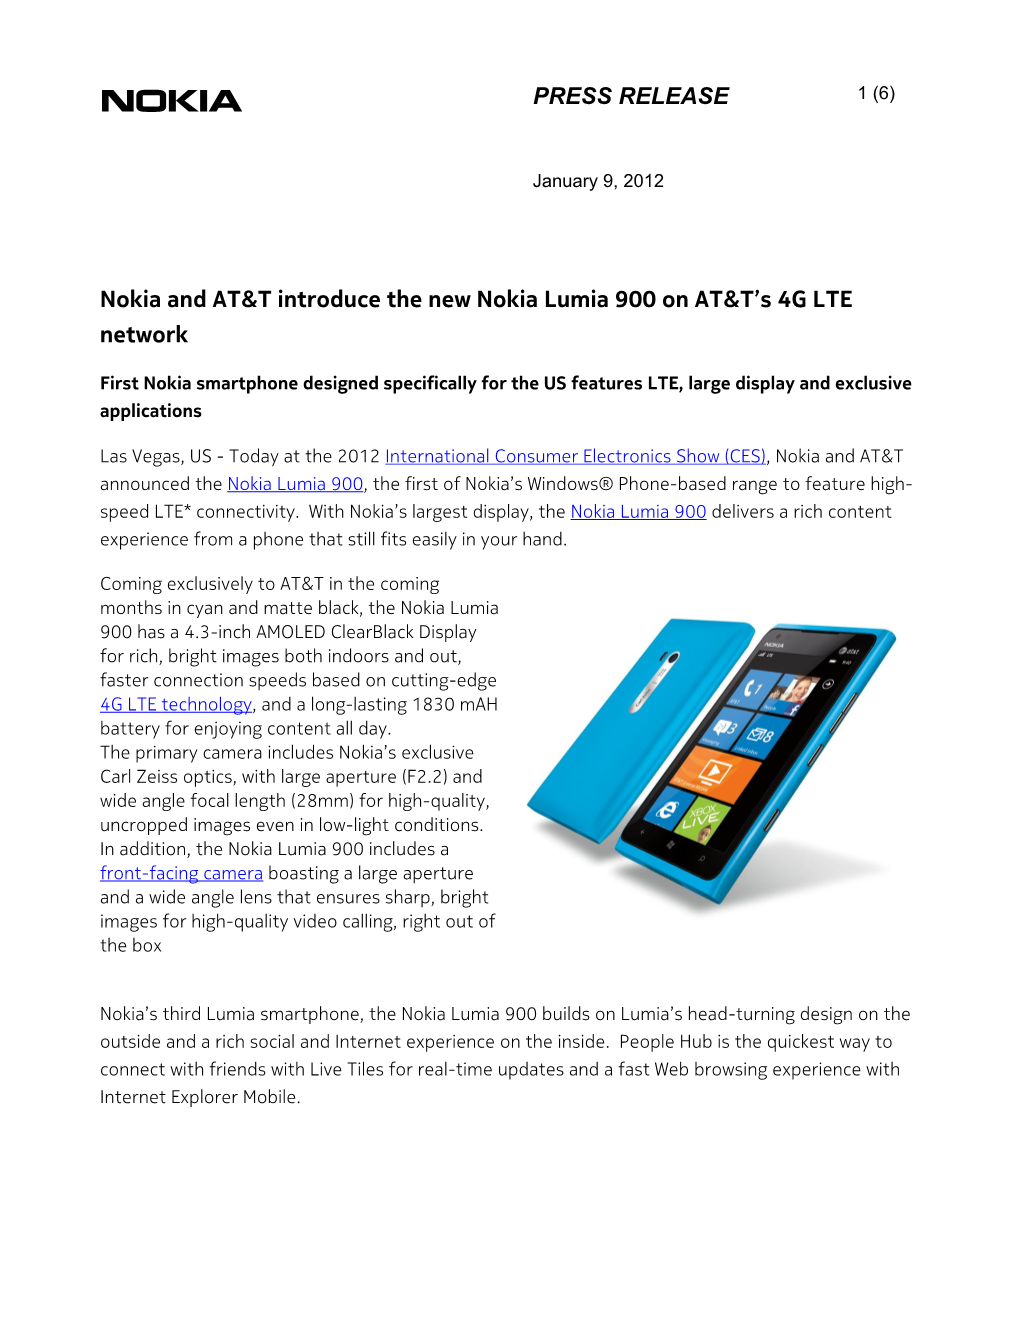 PRESS RELEASE Nokia and AT&T Introduce the New Nokia Lumia 900